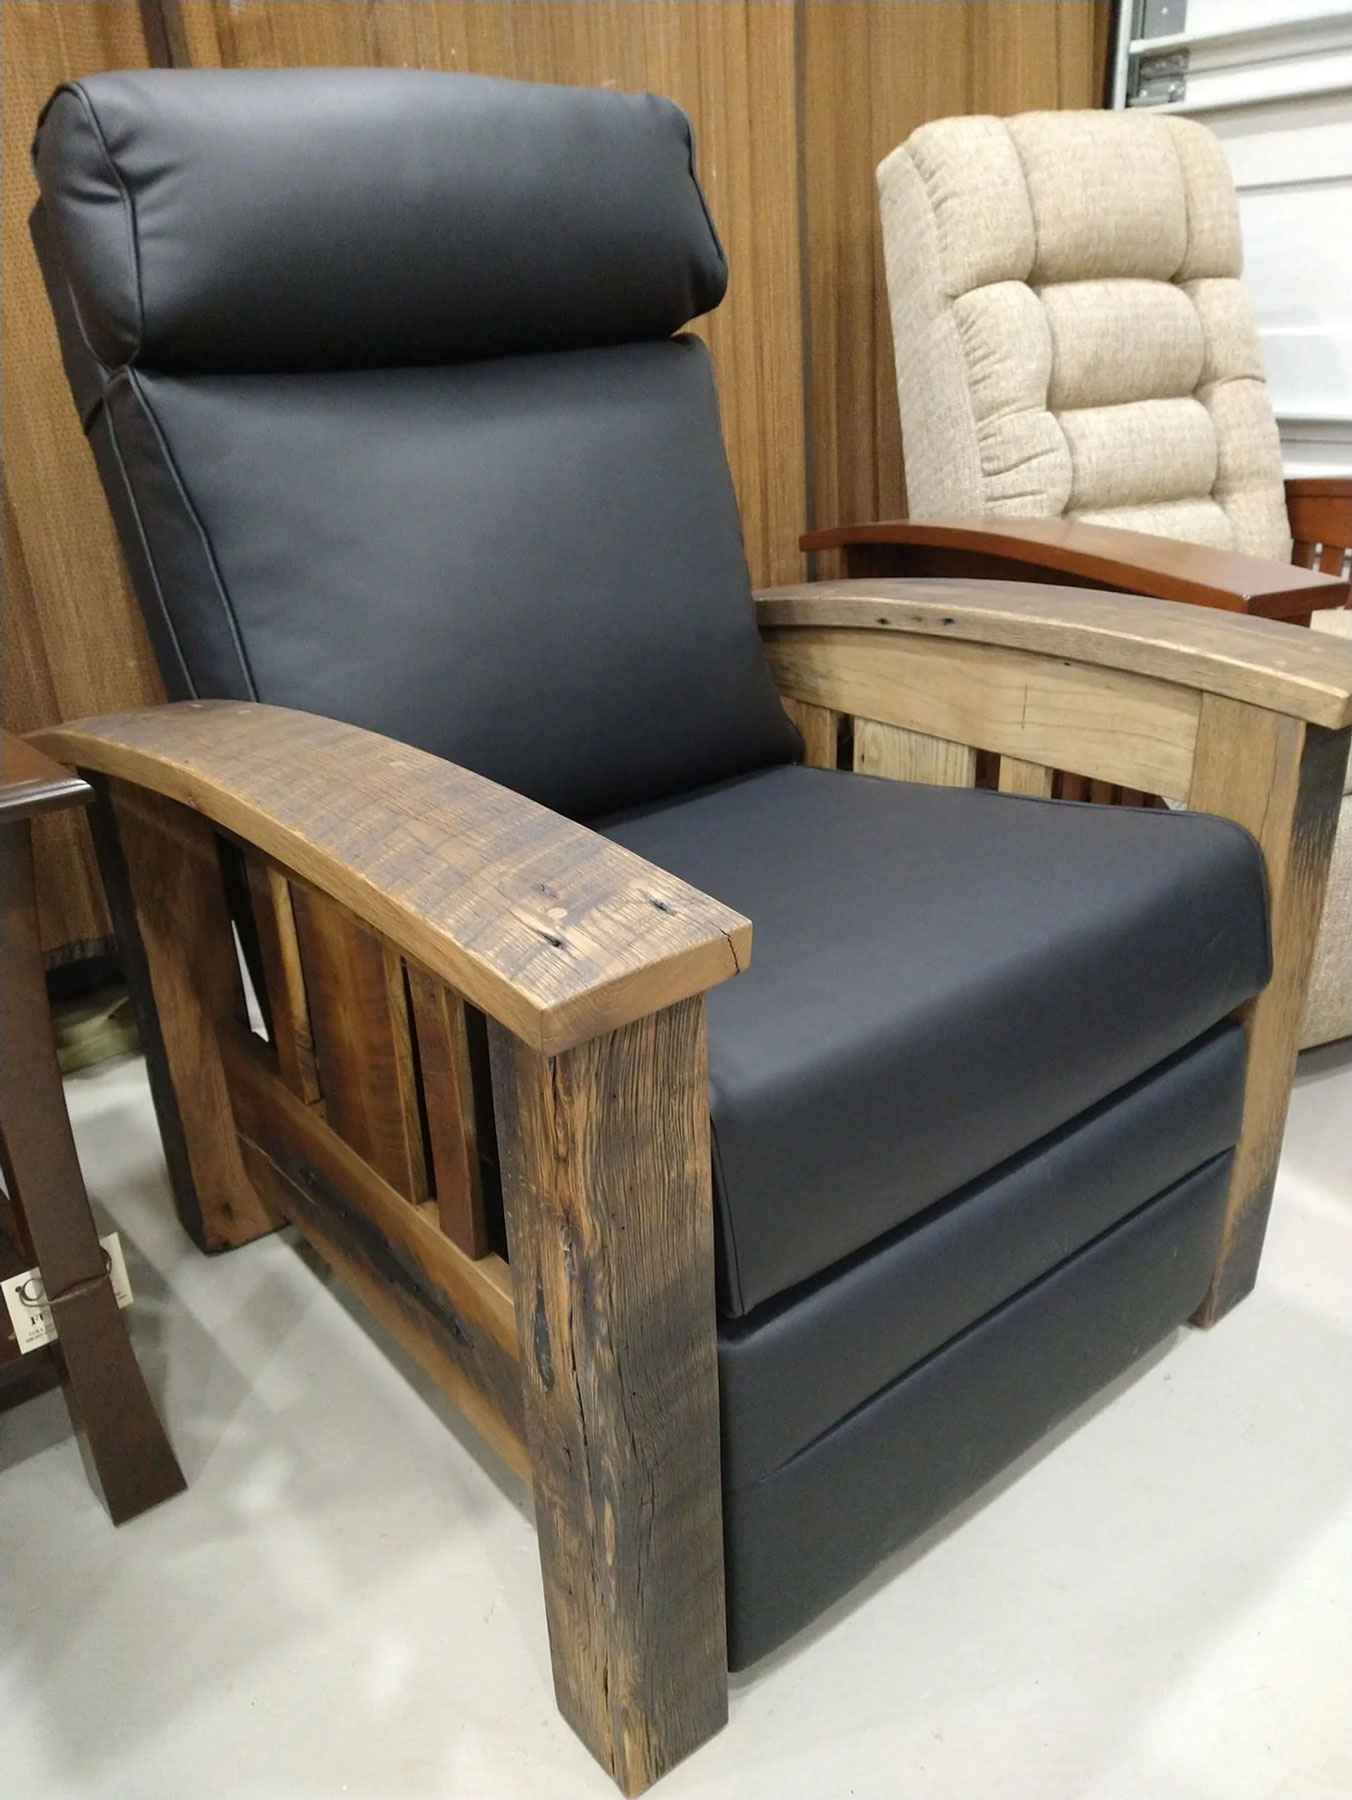 Tiverton Recliner in F118Q Raven Faux Leather and Rough Sawn Oak